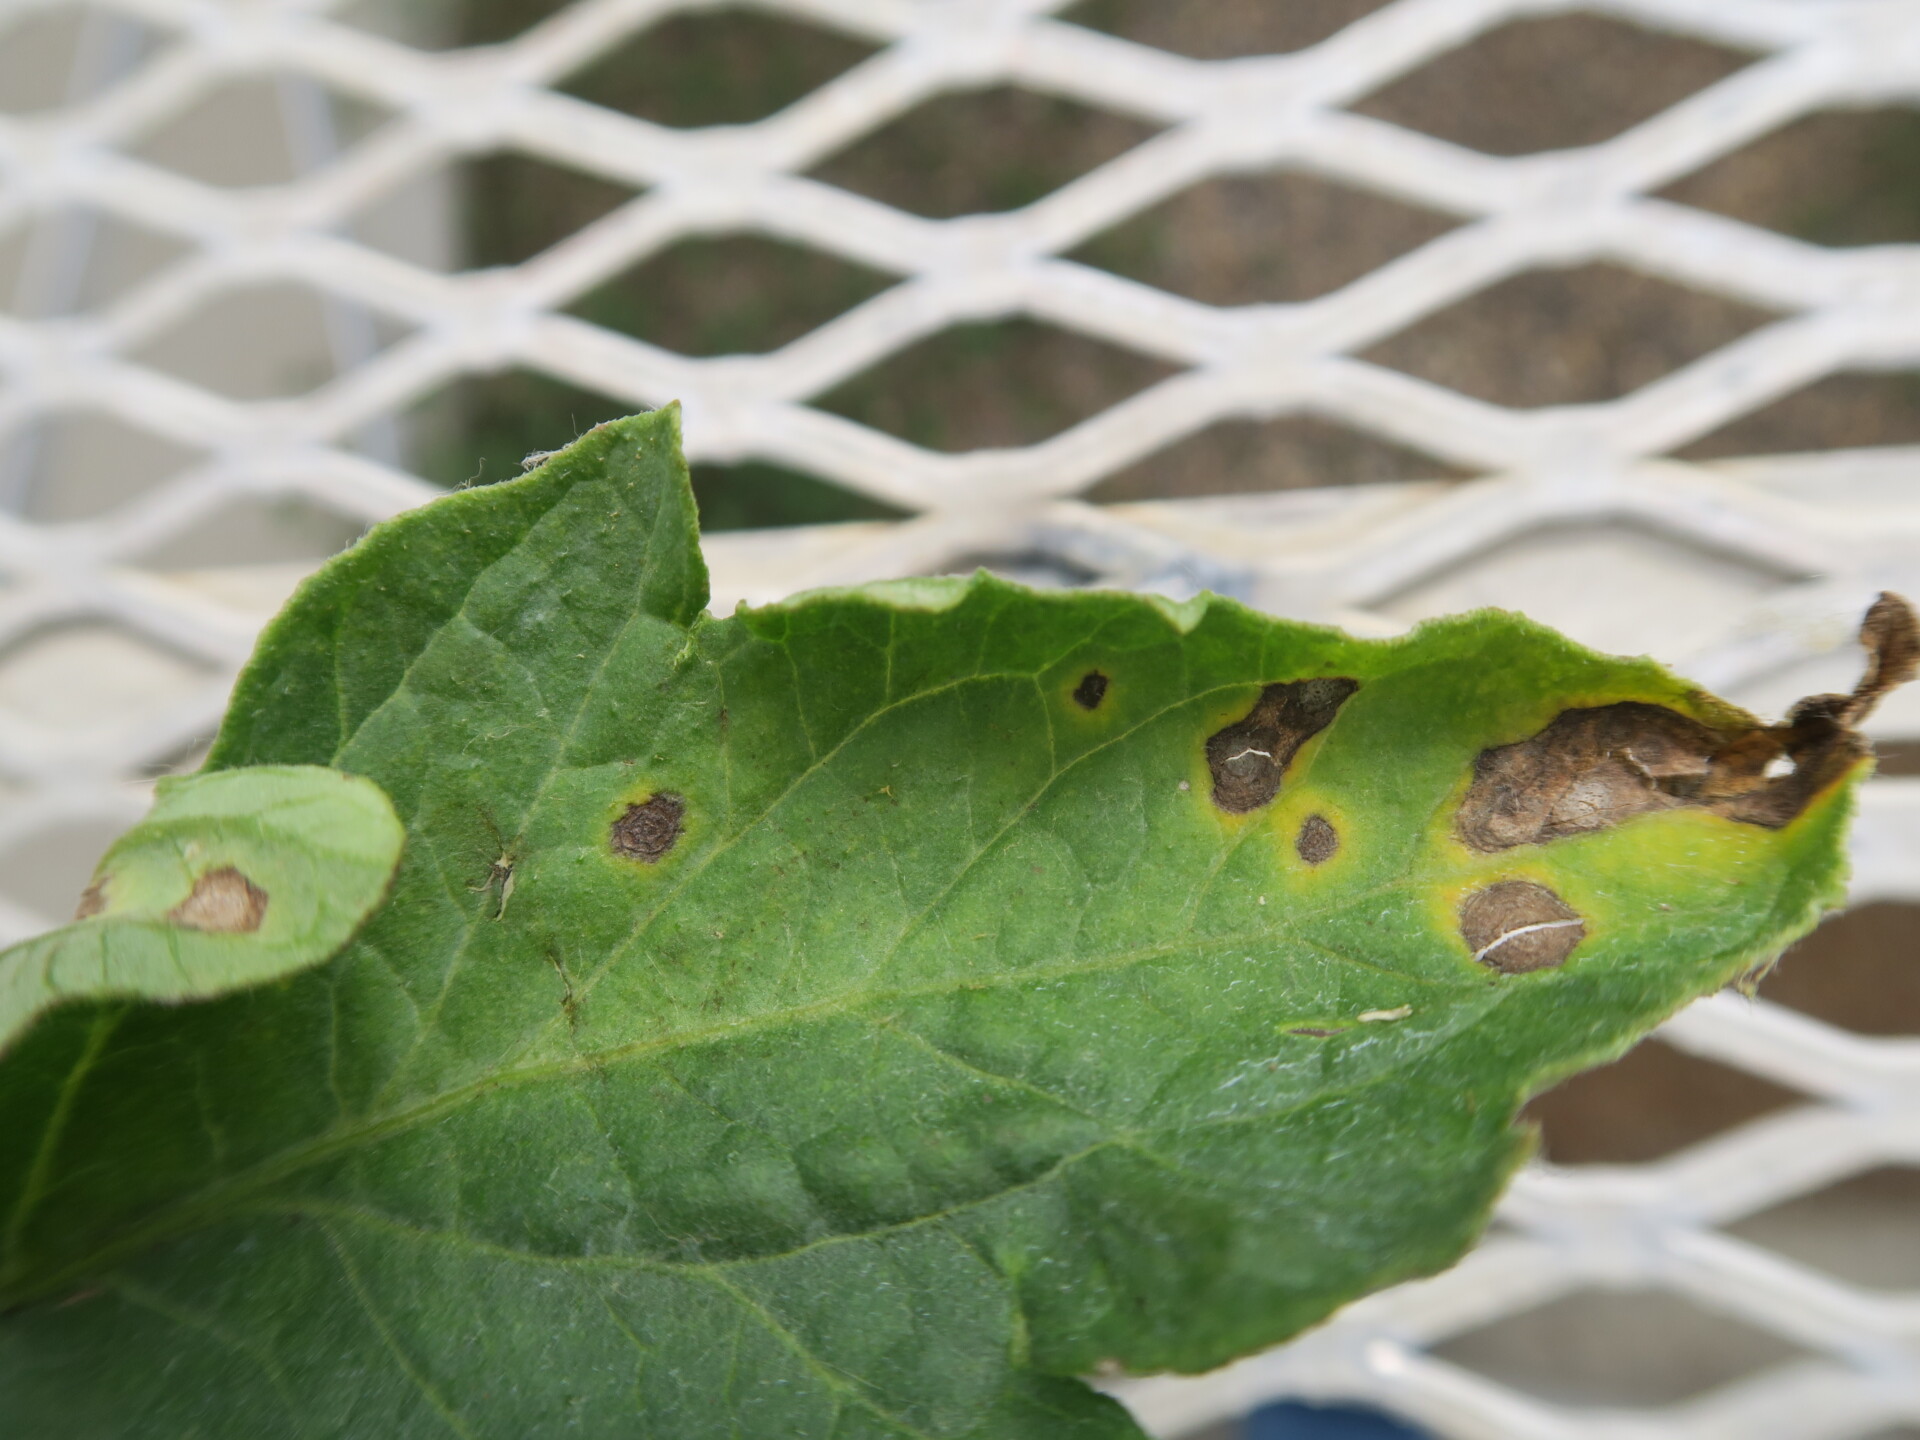 Figure 3. Early blight lesions on tomato leaf. Note cracked lesions.